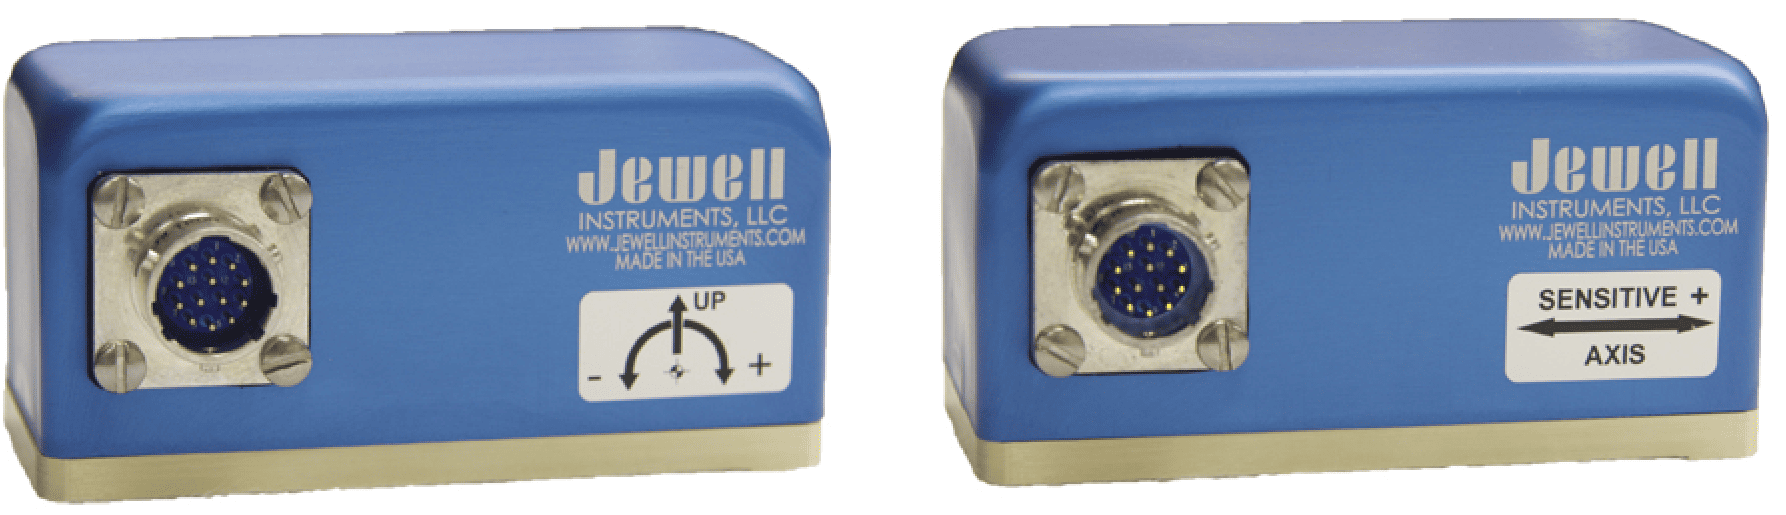 Jewell Announces New Single And Dual Axis Digital Inertial Sensors